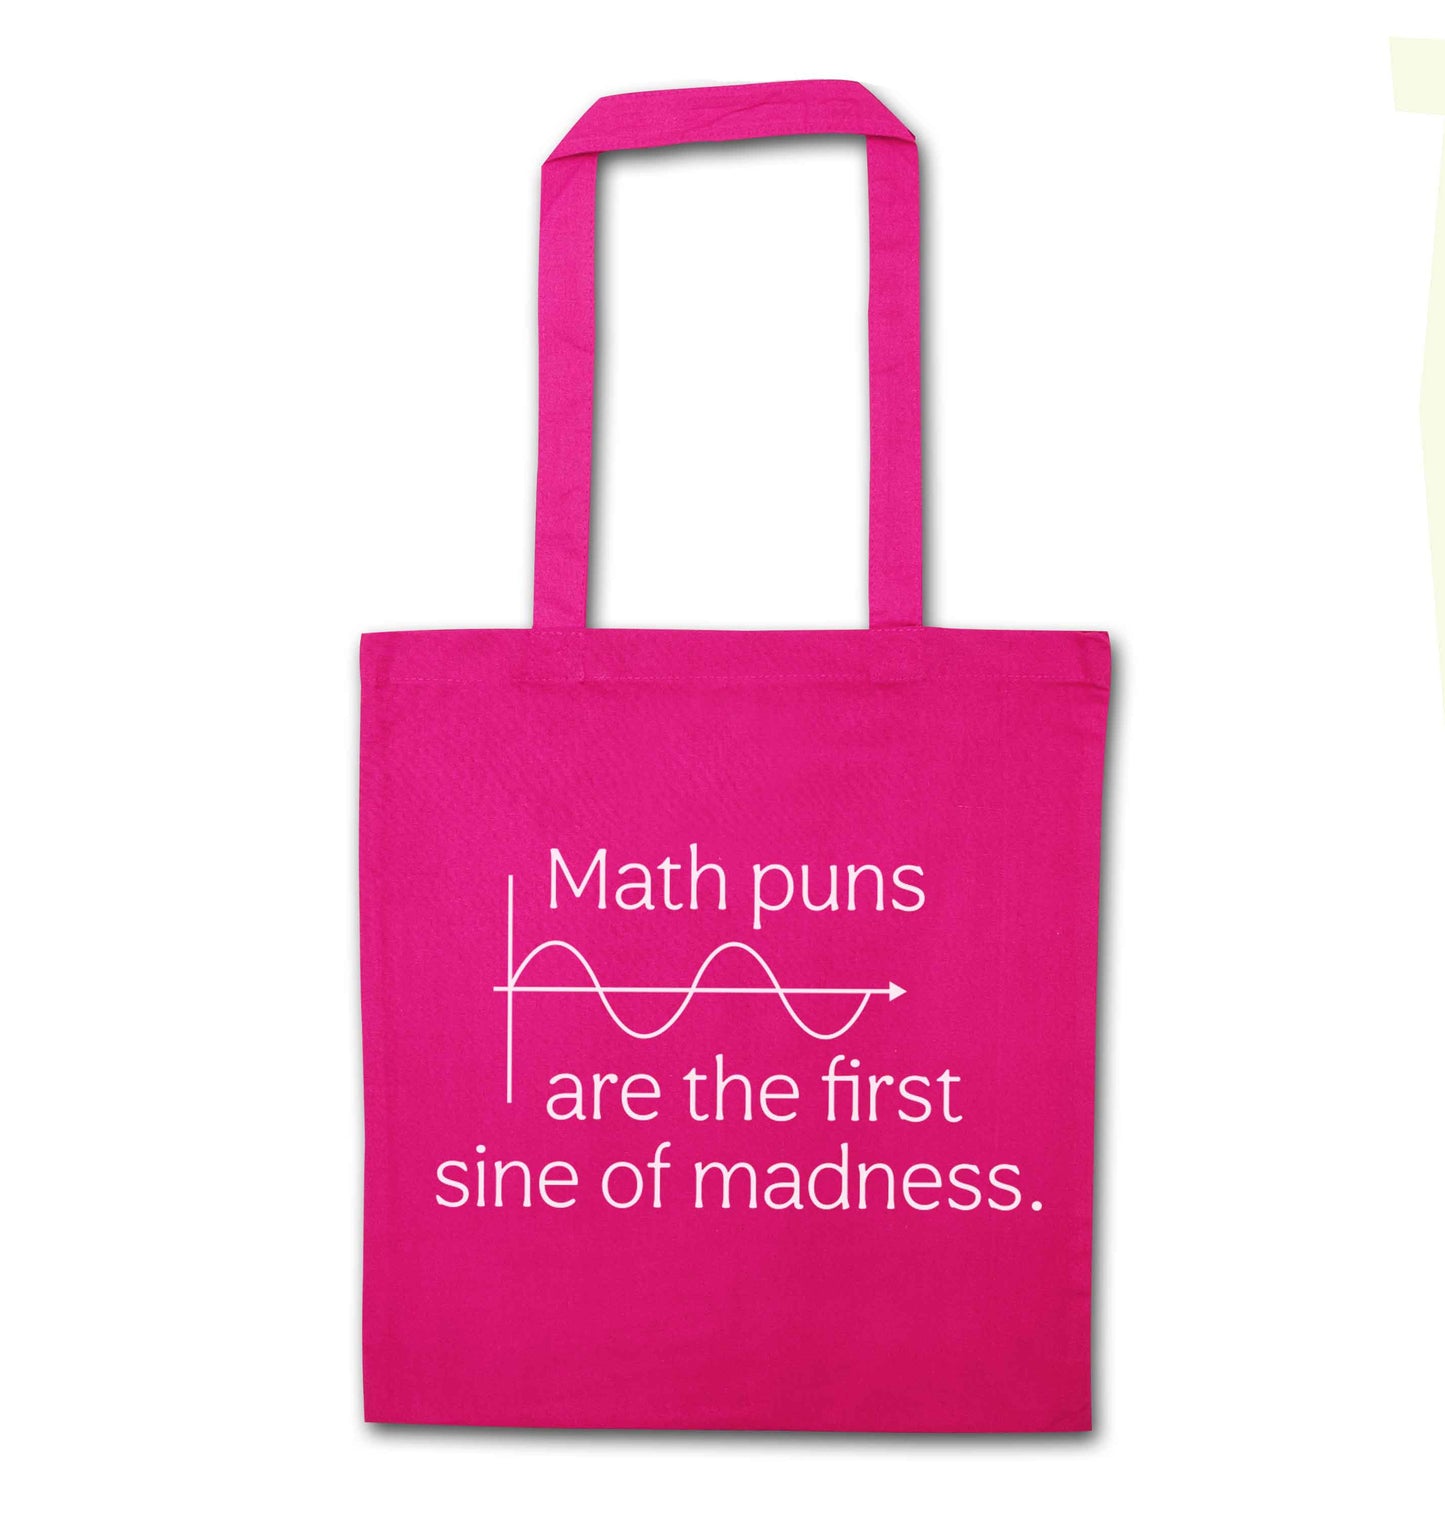 Math puns are the first sine of madness pink tote bag